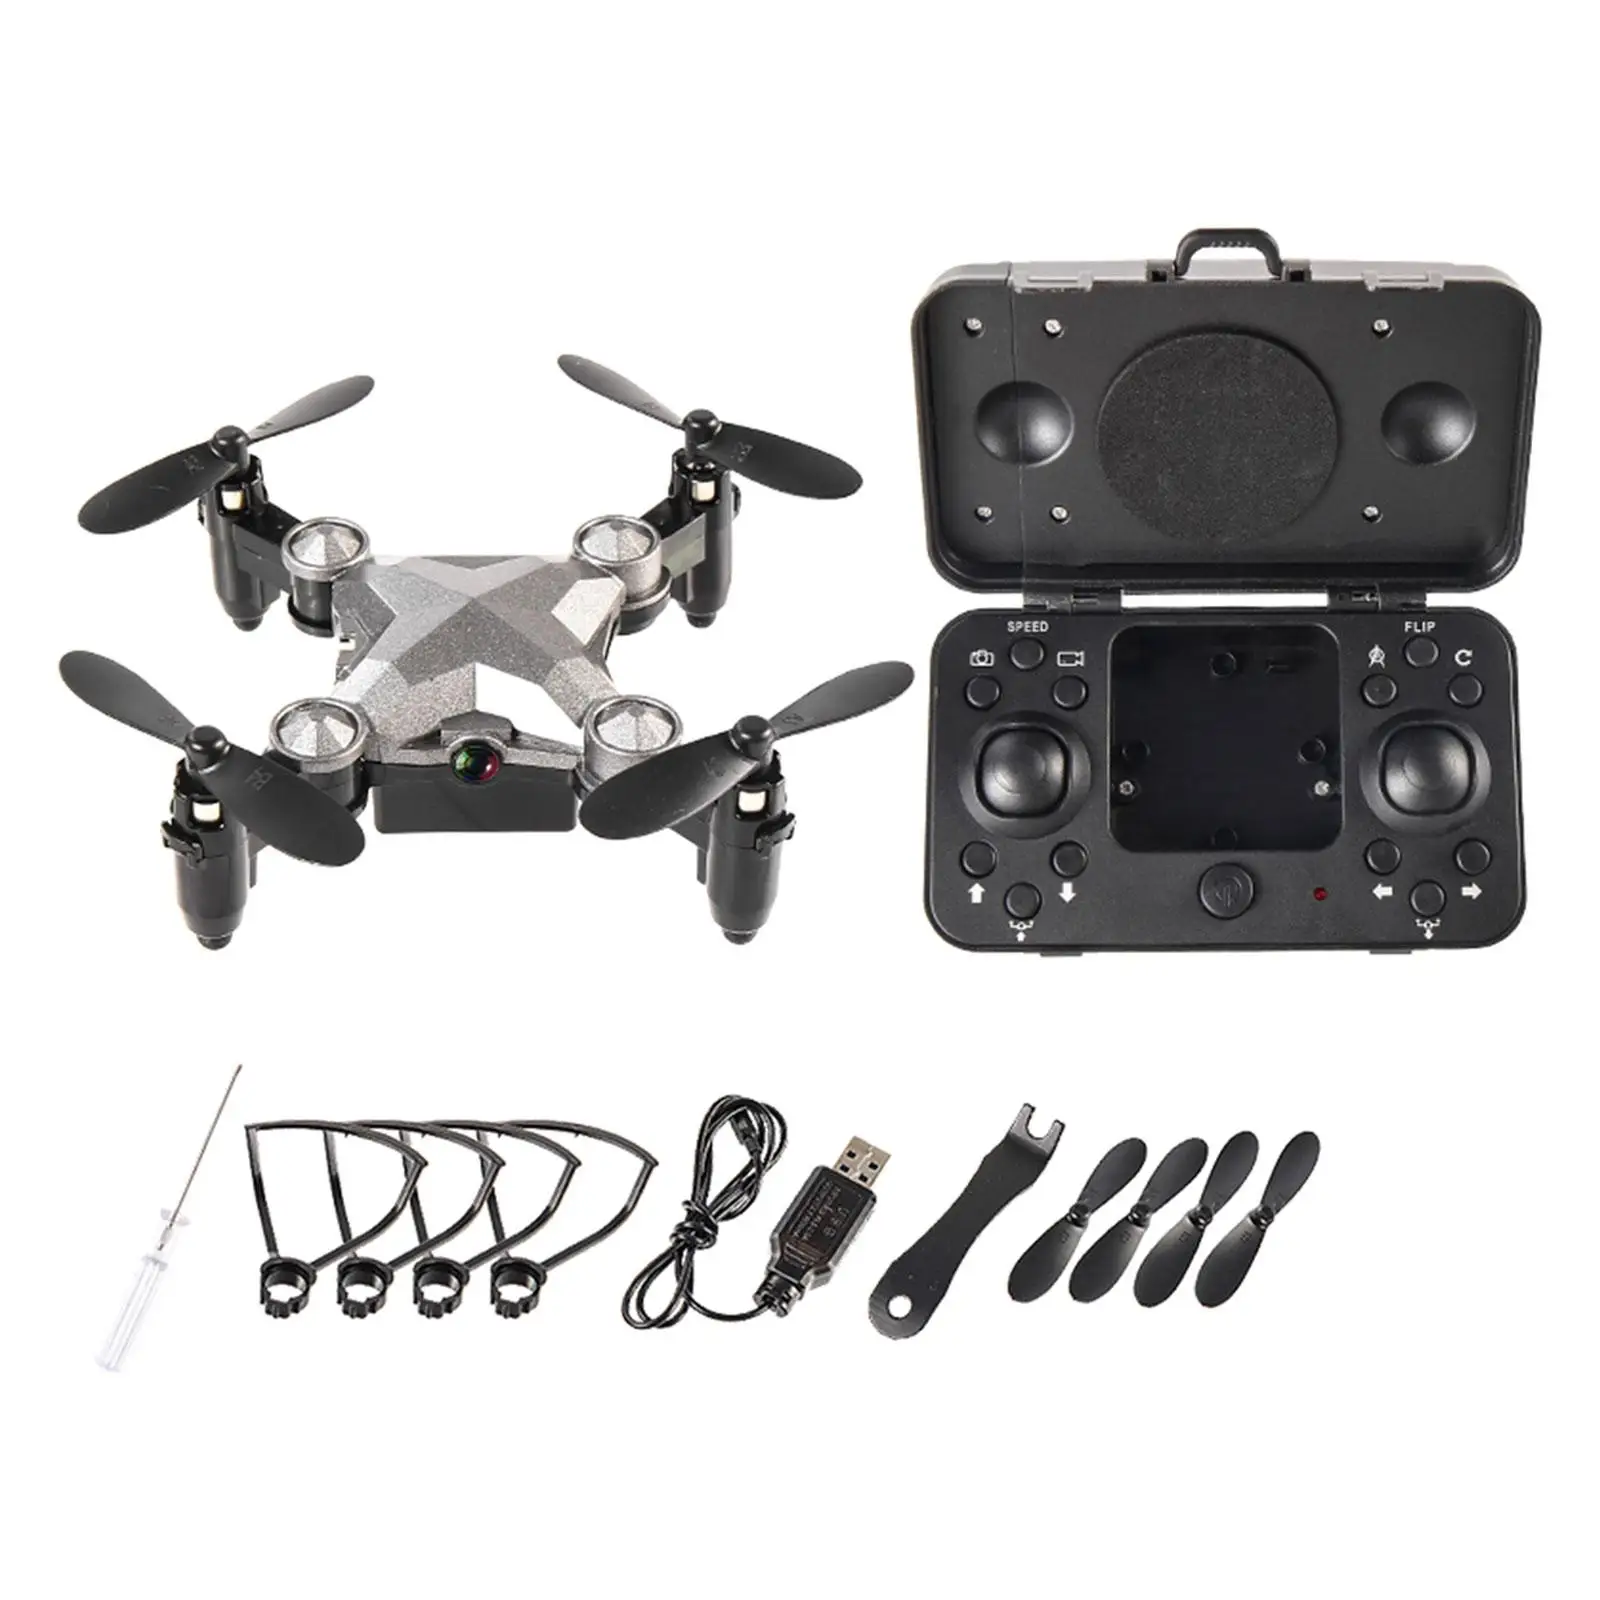 Mini Drone 4 Channels 360 Degree Flipping 720 Camera Remote Control Quad RC Airplane for Birthday Gift Helicopter Toys Children